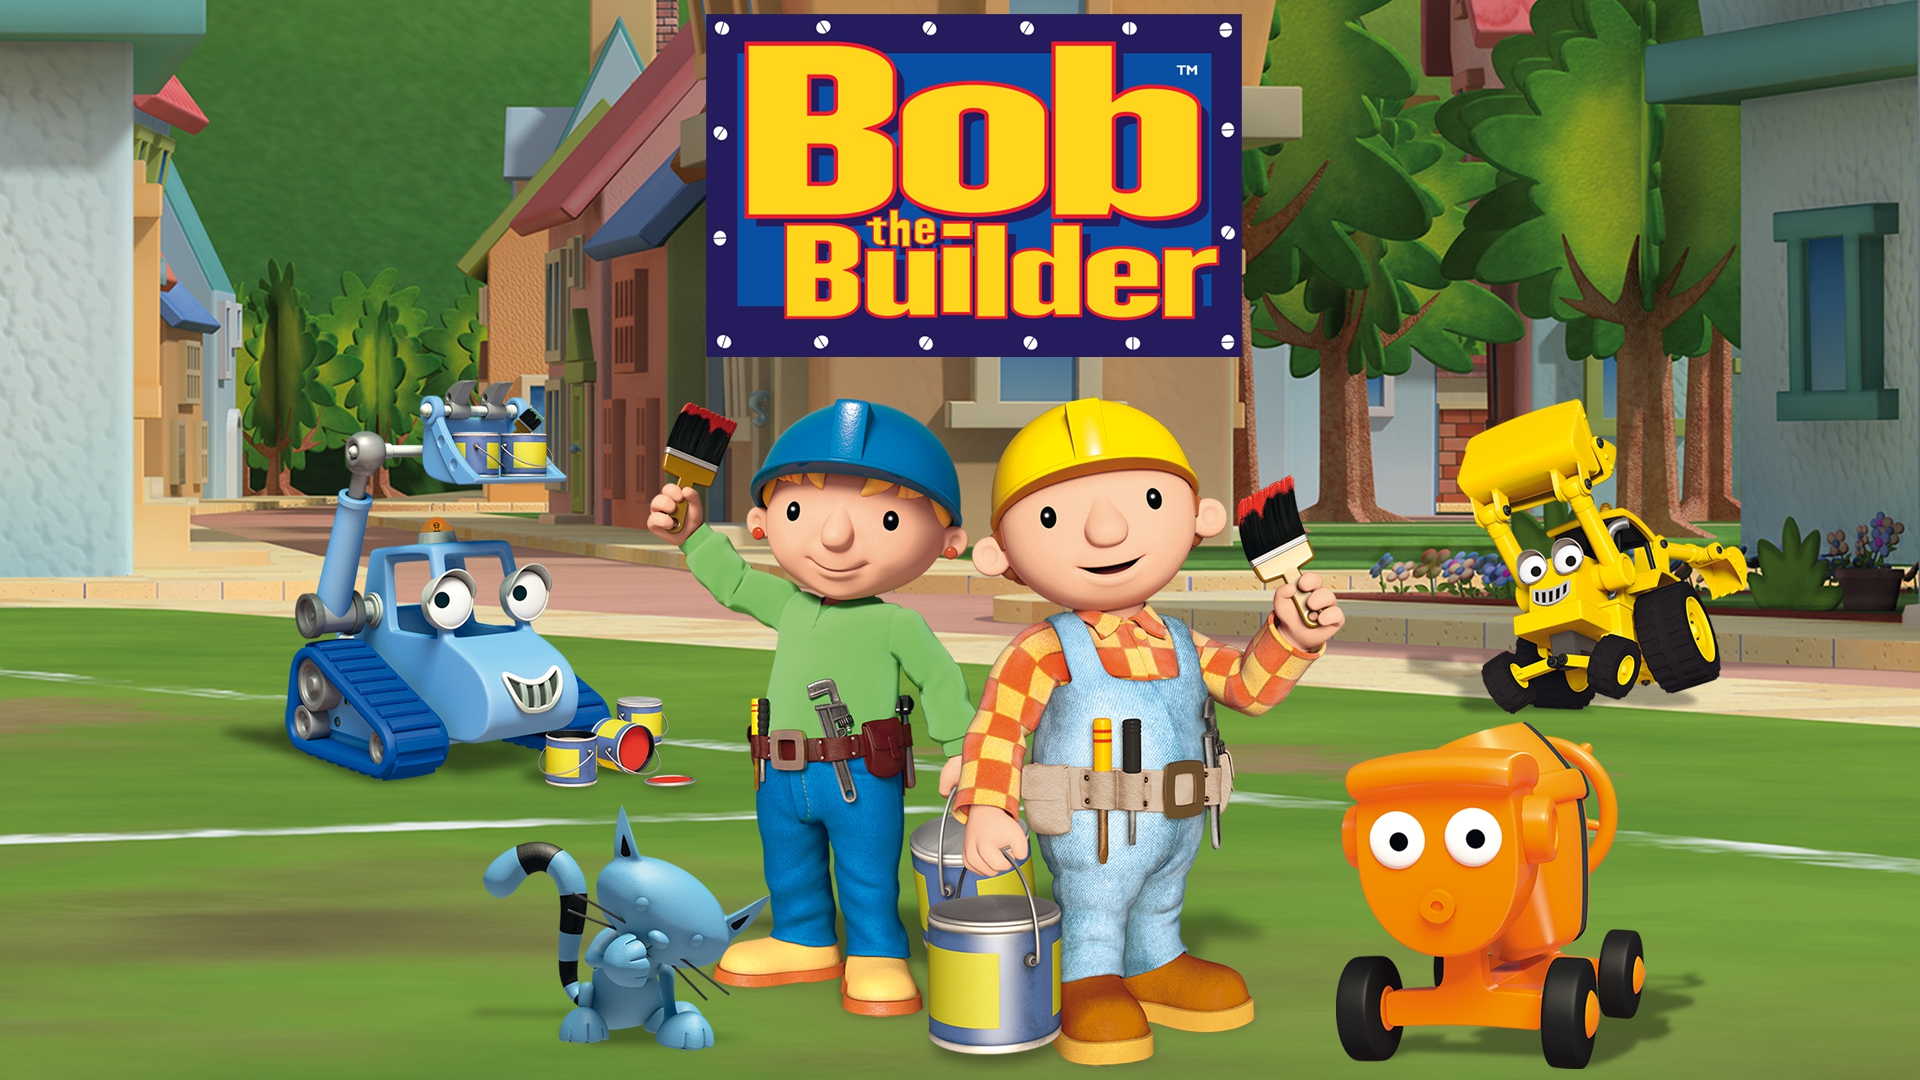 Bob the Builder (Classic) Season 8 Episodes Streaming Online for Free The R...